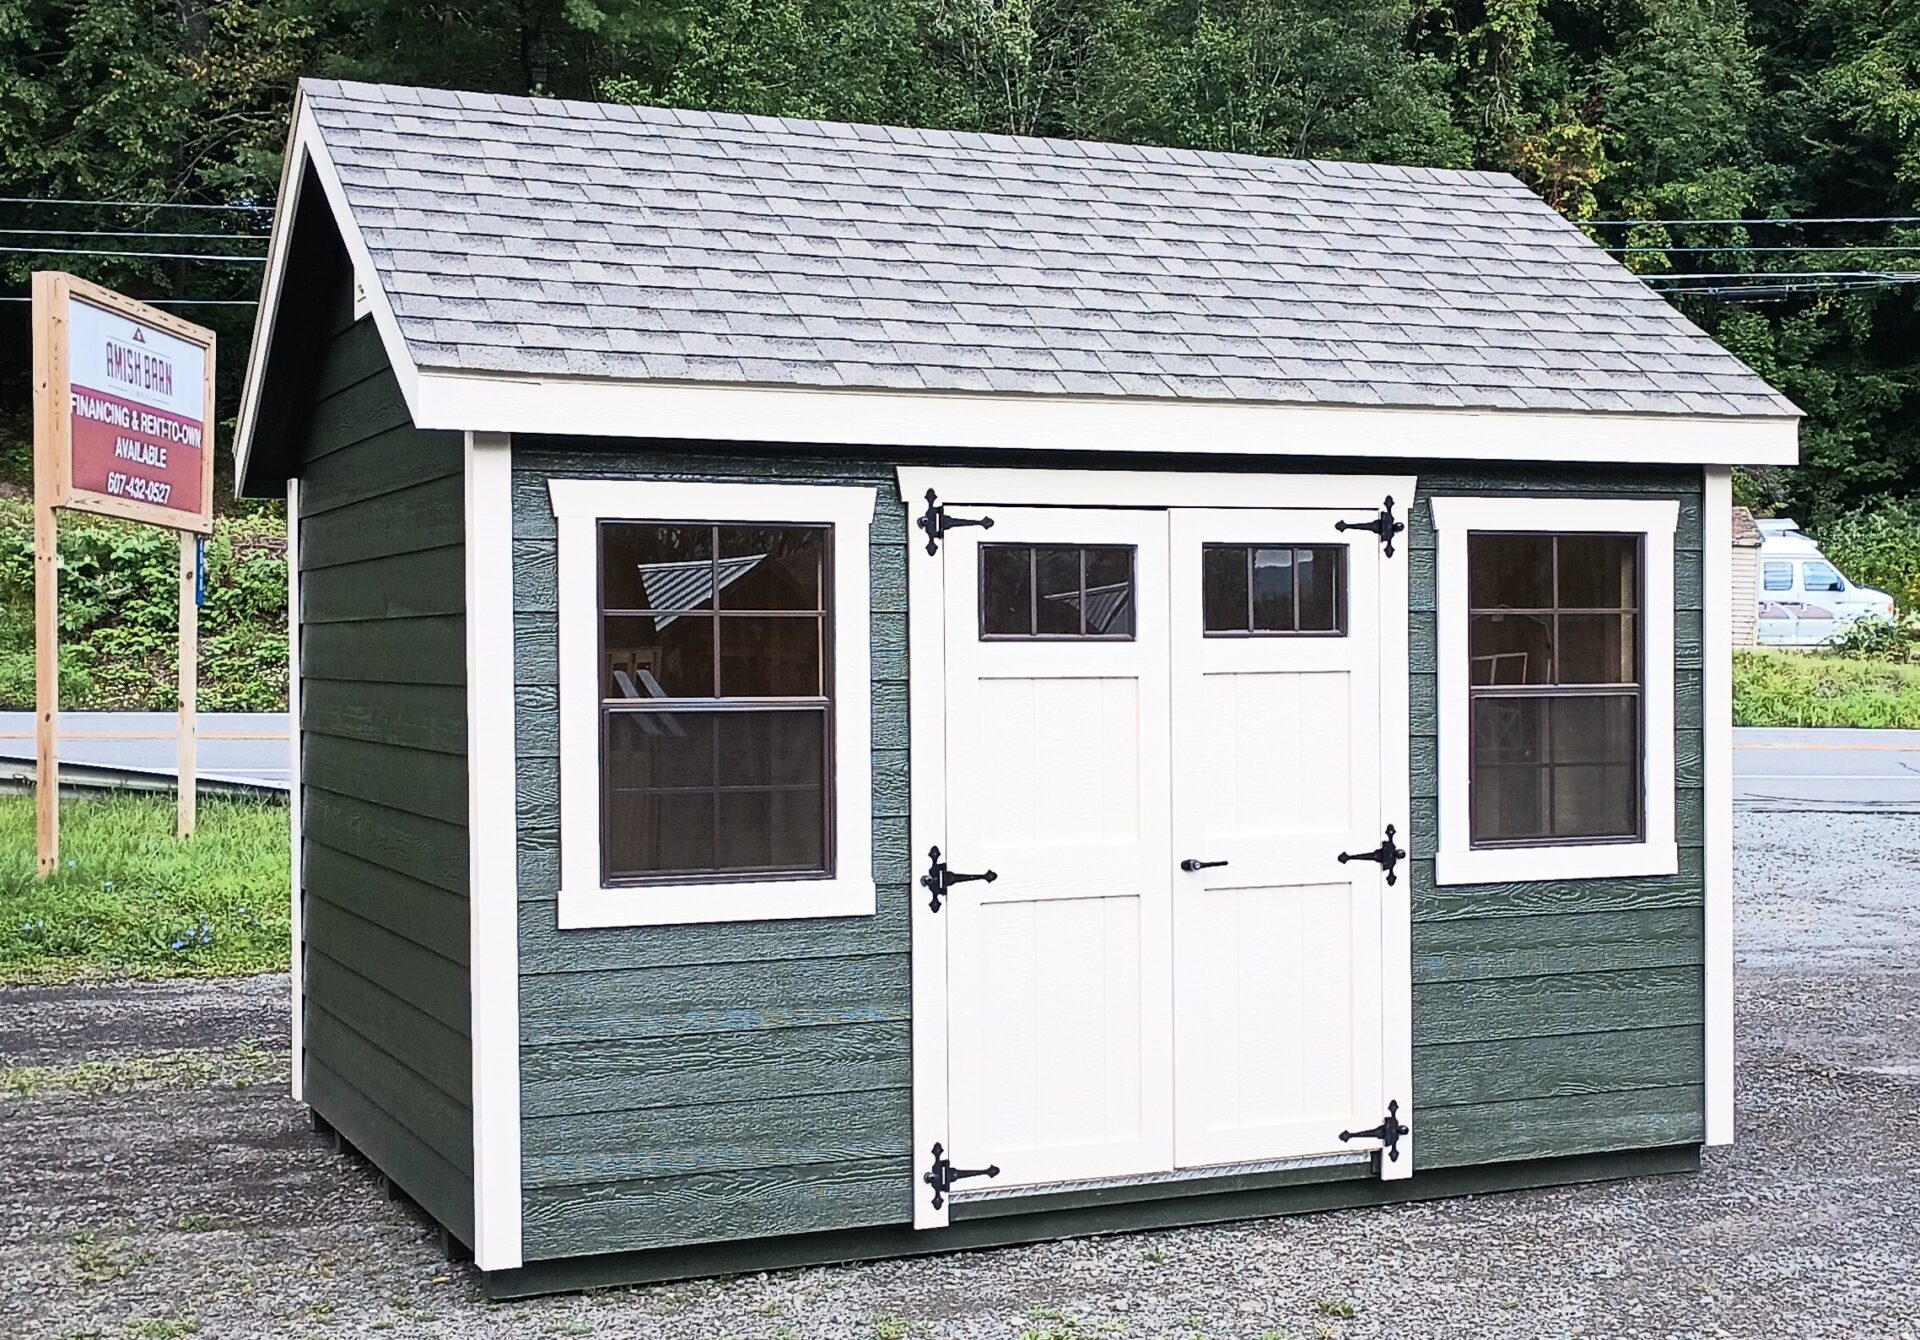 Green shed with cream trim and doors, 2 windows, shingled roof